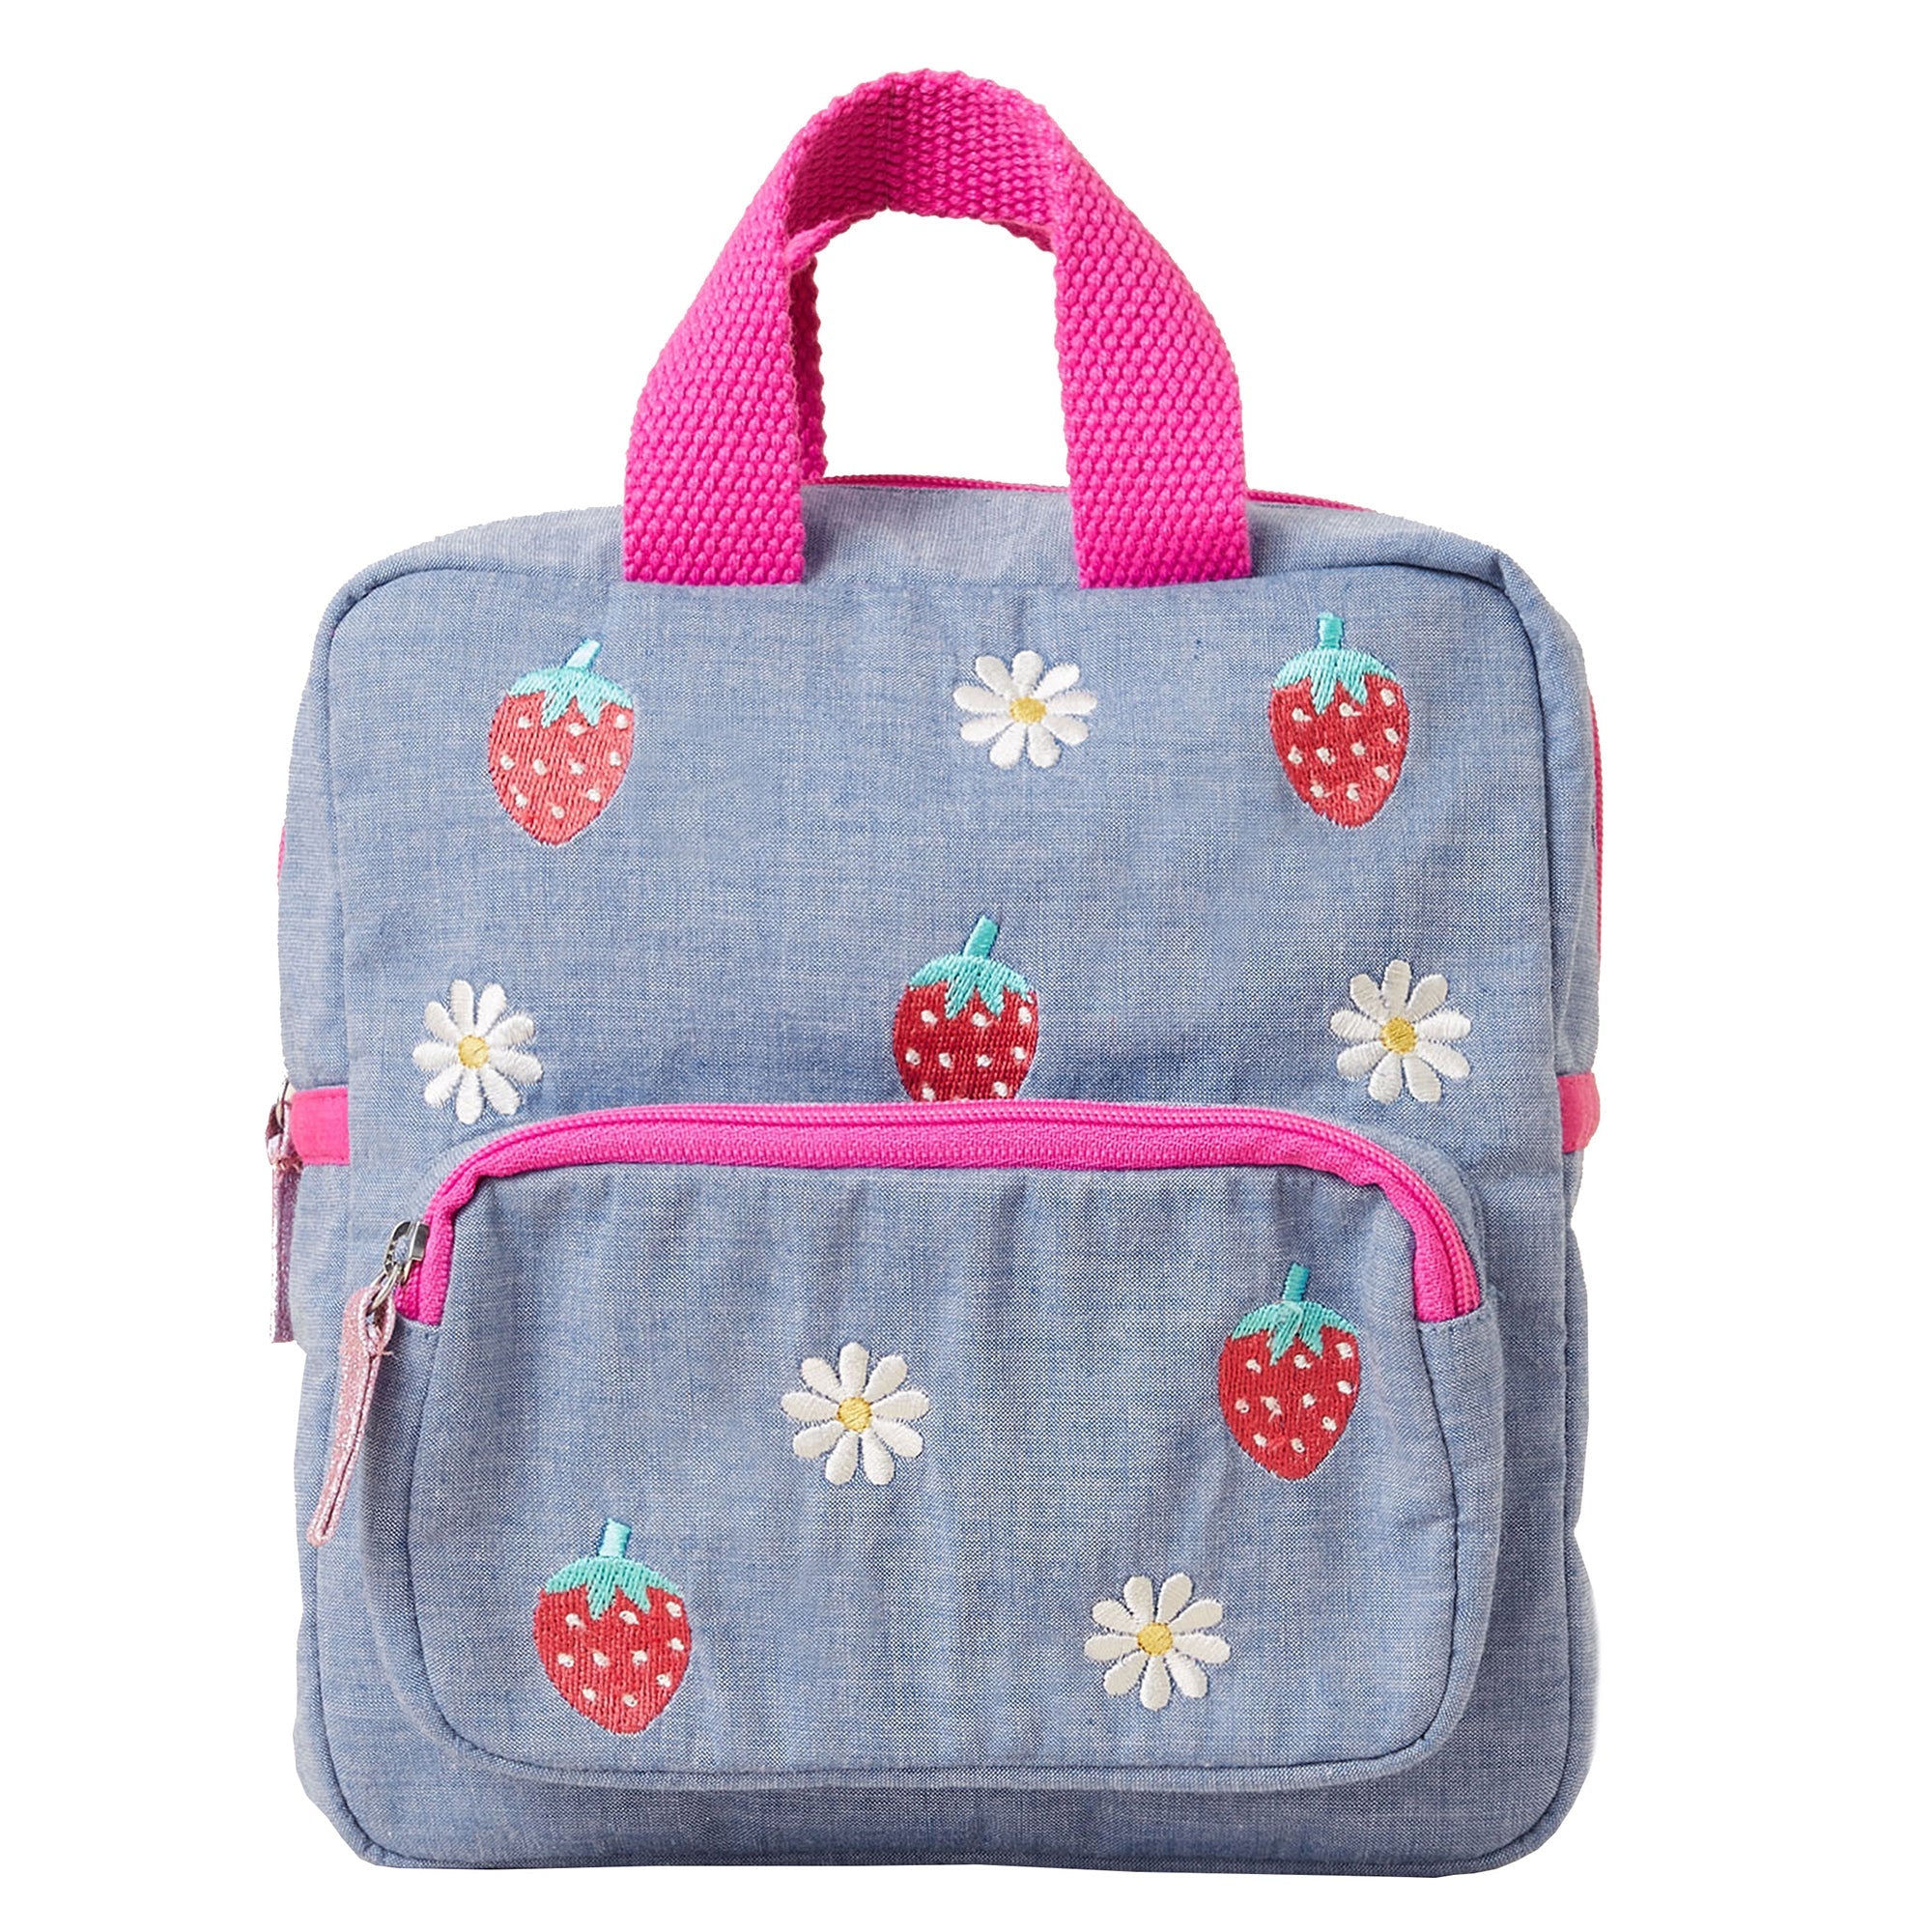 Accessorize London Girl's Chambray Strawberry Backpack